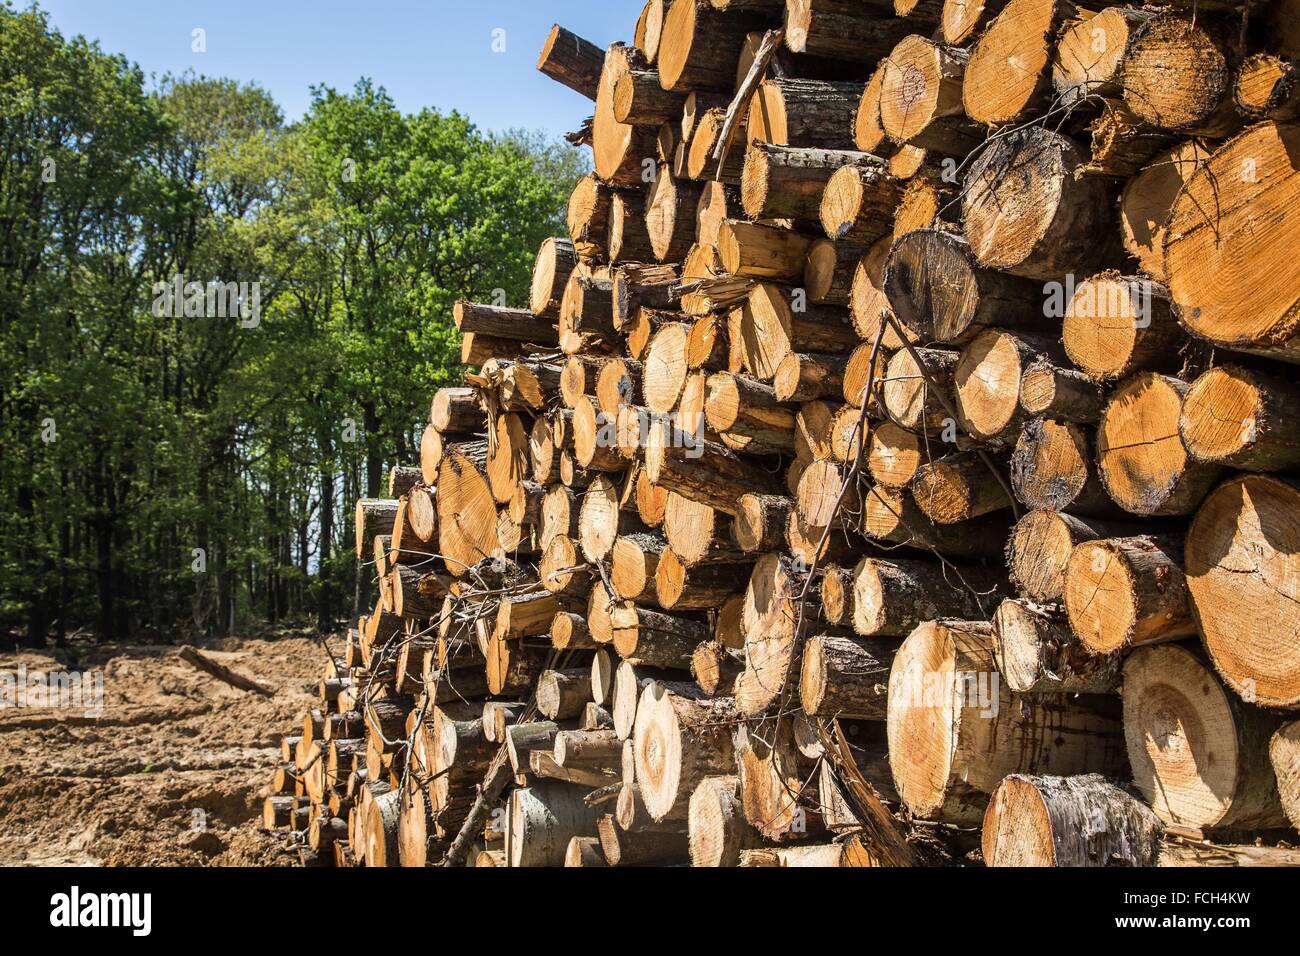 ILLUSTRATION OF FIREWOOD FOR HEATING Stock Photo